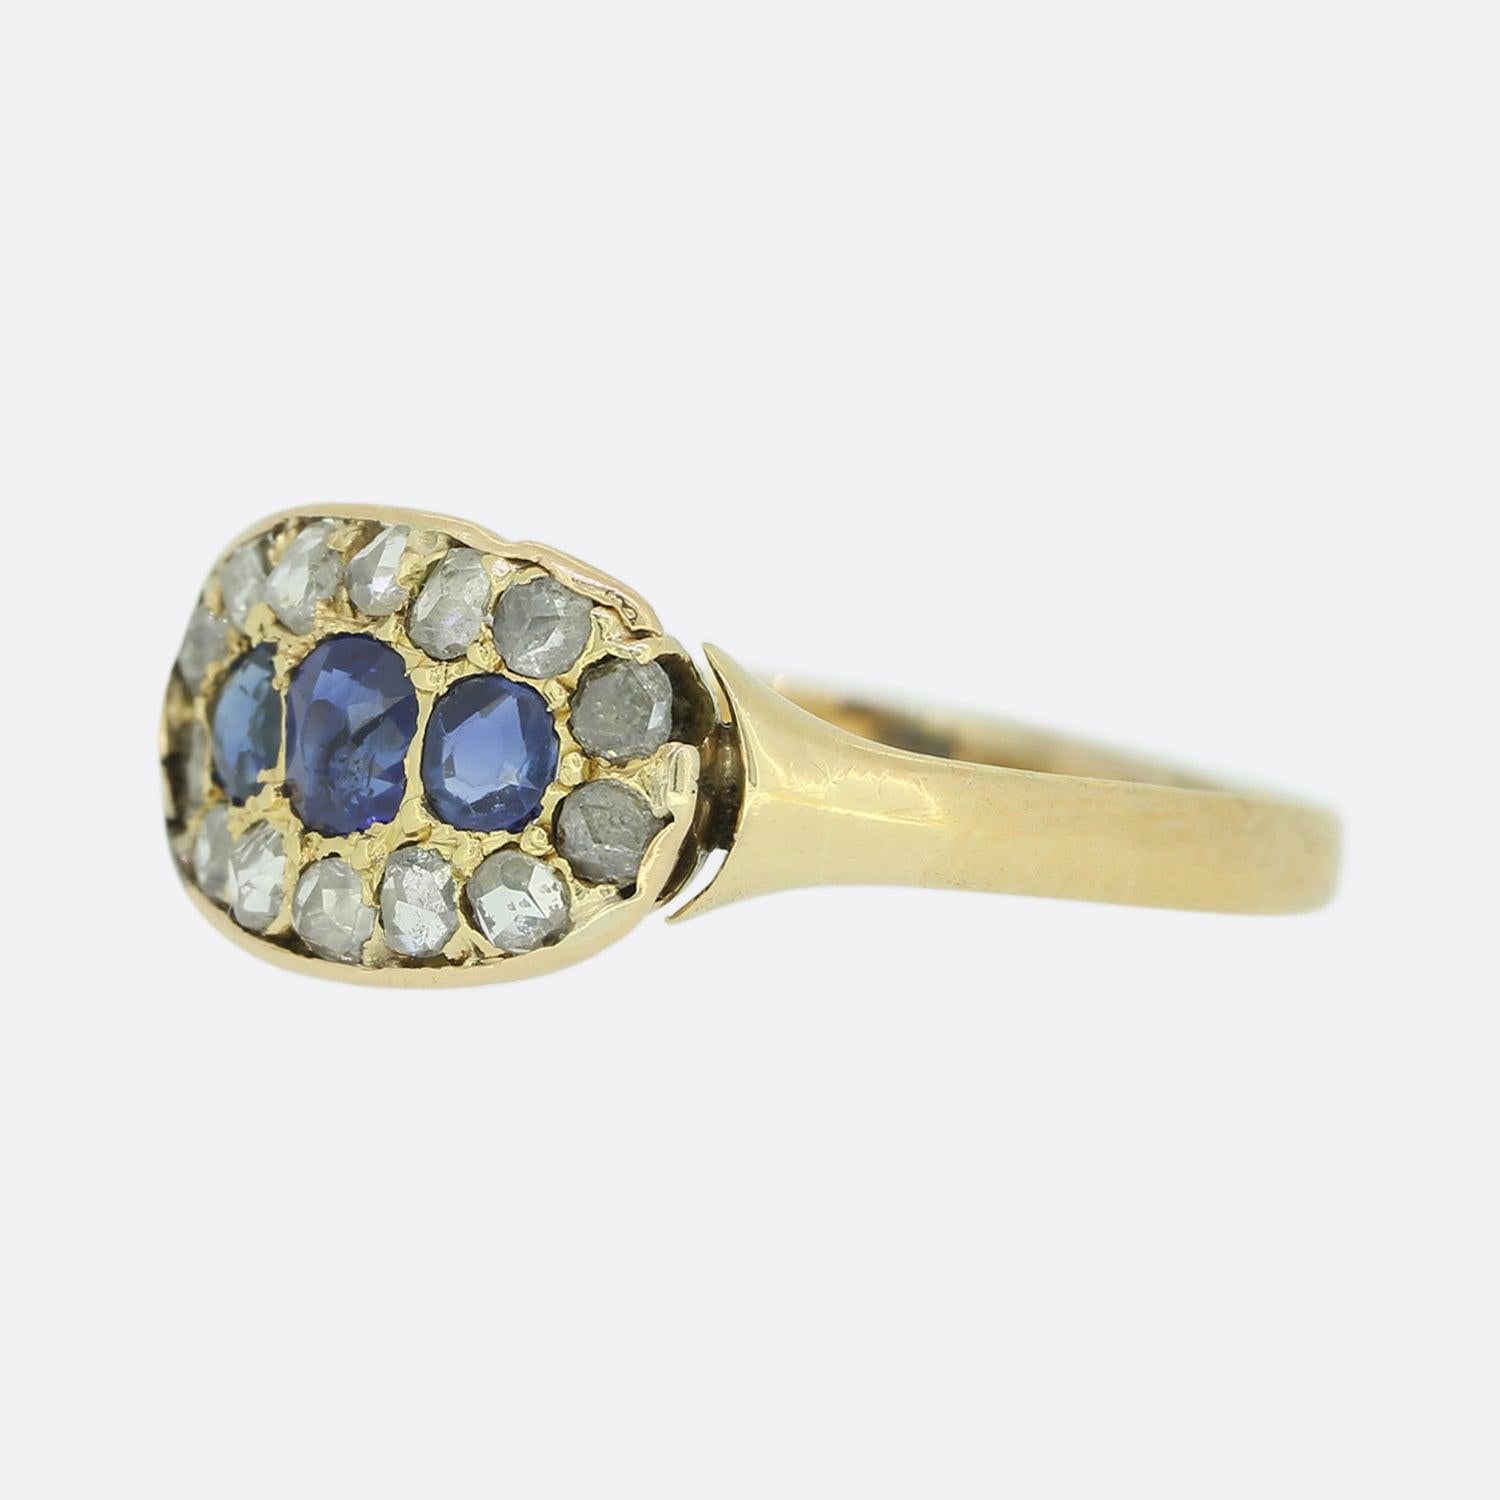 Here we have an 18ct yellow gold cluster ring from the Victorian era. The ring is set with an oval shaped sapphire to the centre which is flanked on either side by a single round shaped sapphire. These focal gemstones are then accentuated by a